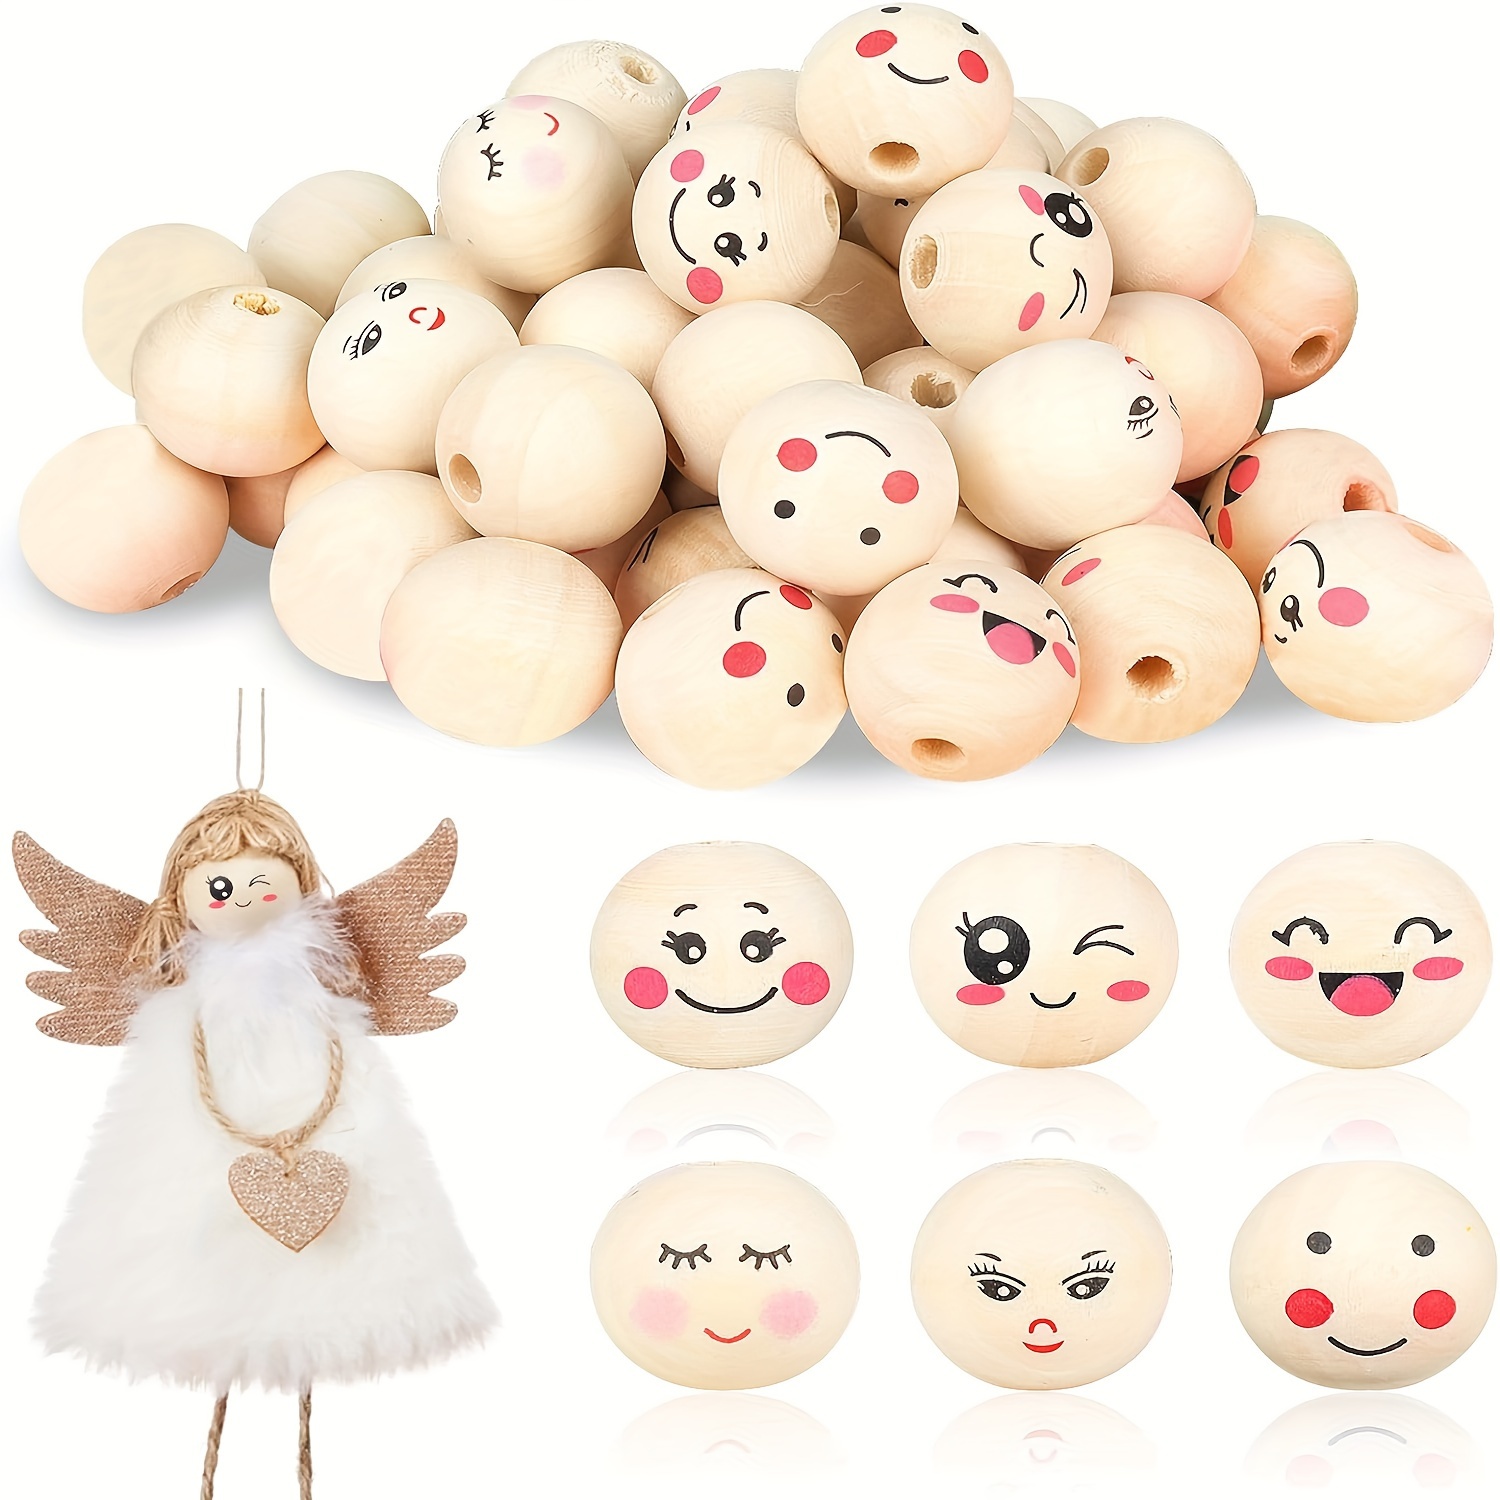 

60pcs Wooden Beads With Face, Wooden Balls With Hole And Face Pattern, 20mm, 6 Style, For Jewelry Making Diy Bracelet And Other Creative Decors Handmade Craft